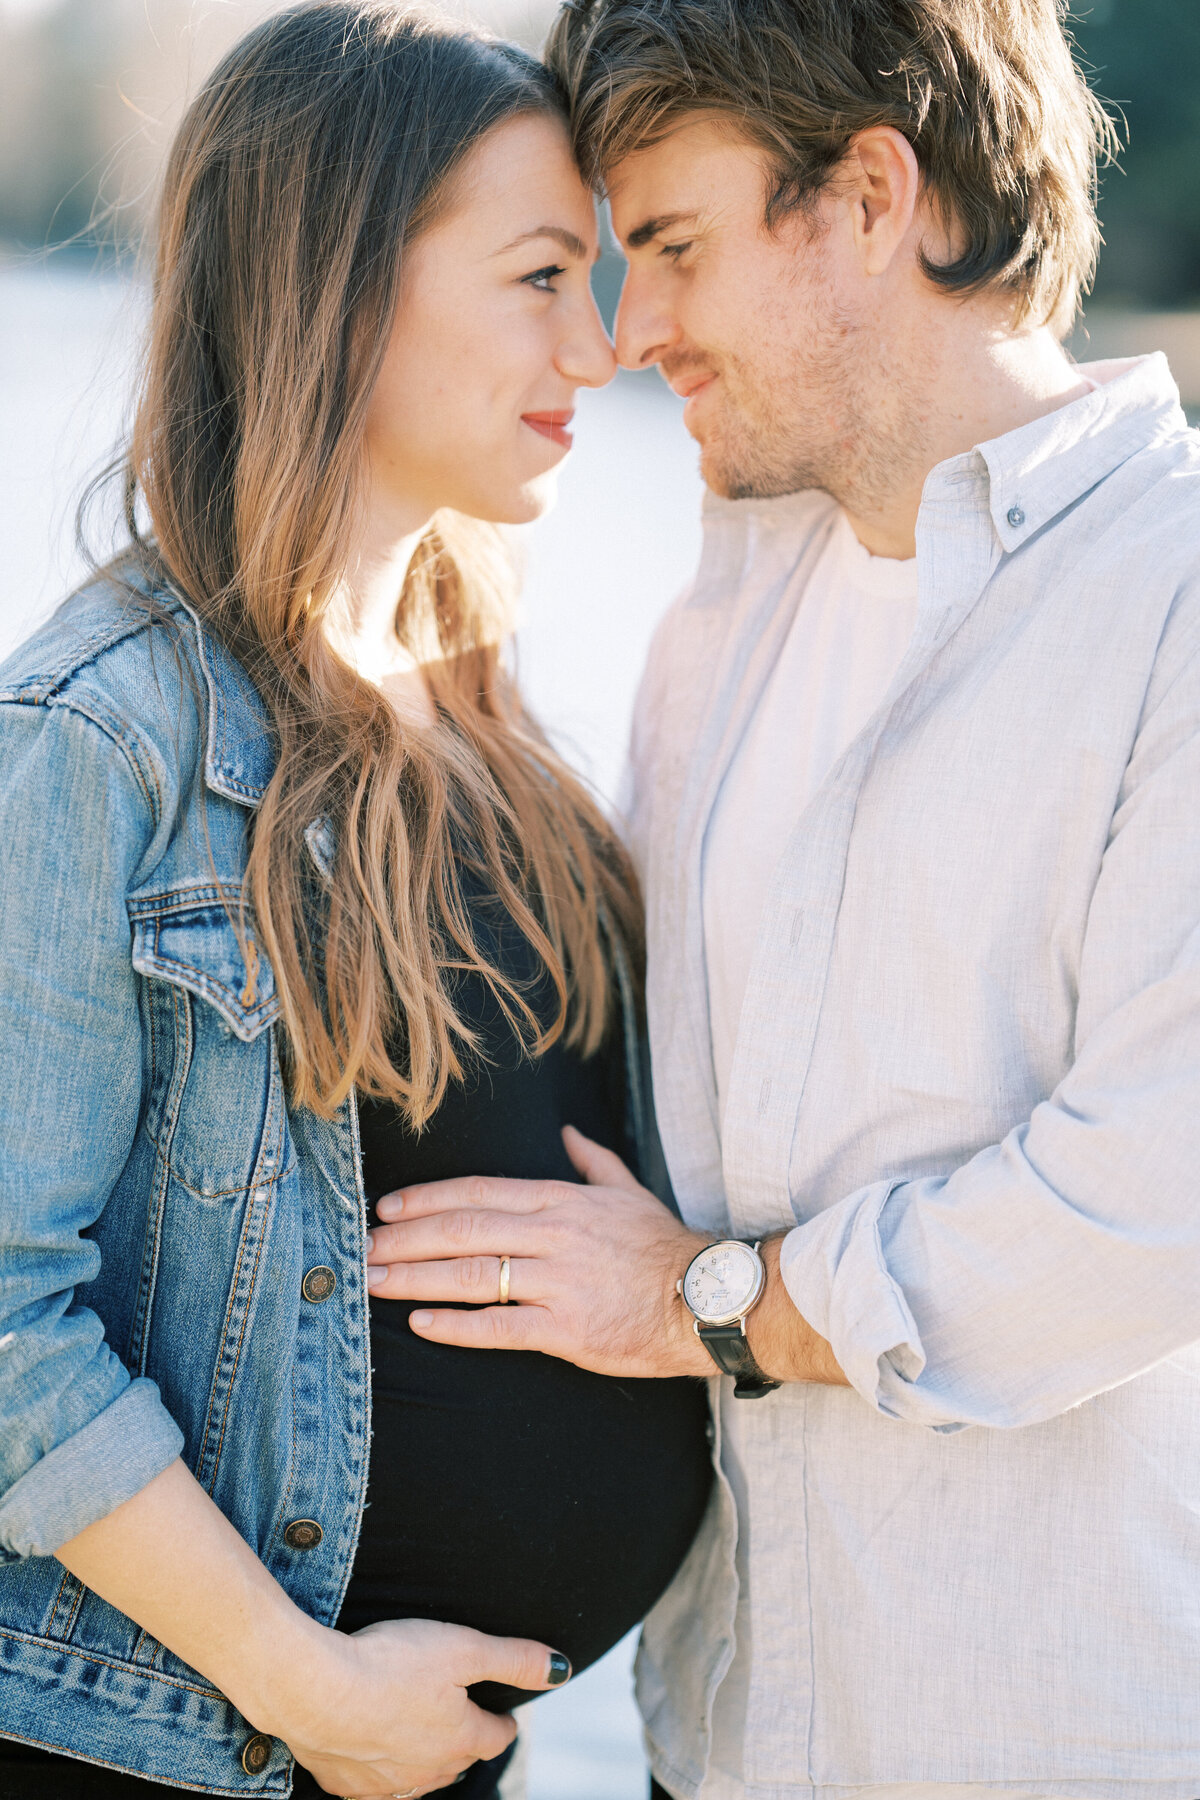 Portrait of a man and a pregnant woman in a black shirt and blue jean jacket leaning into each other holding her belly.